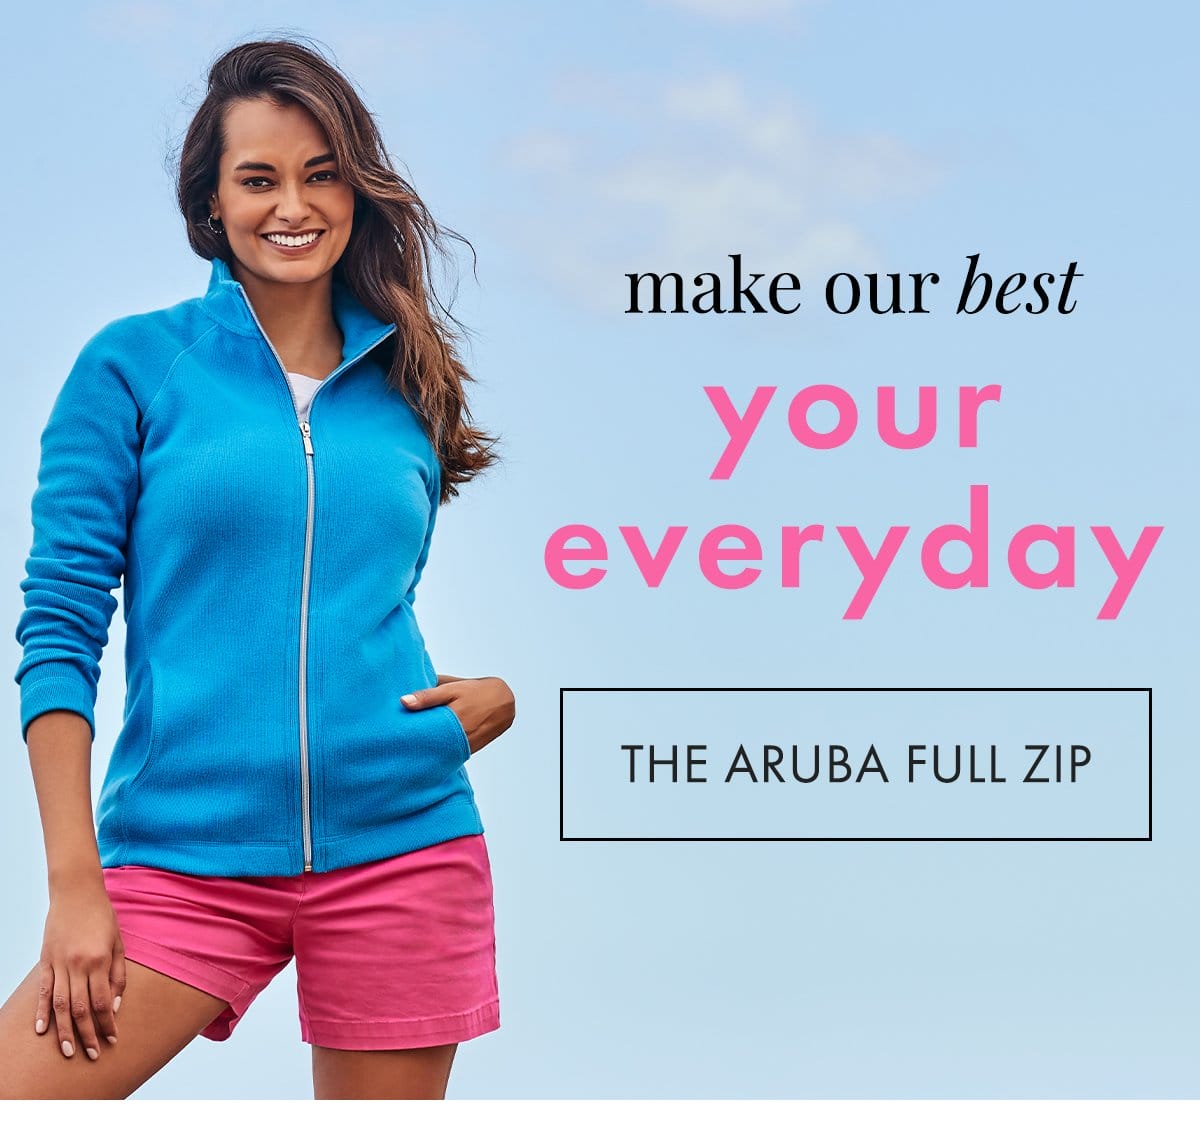 Make out best your everyday. The Aruba Full Zip.